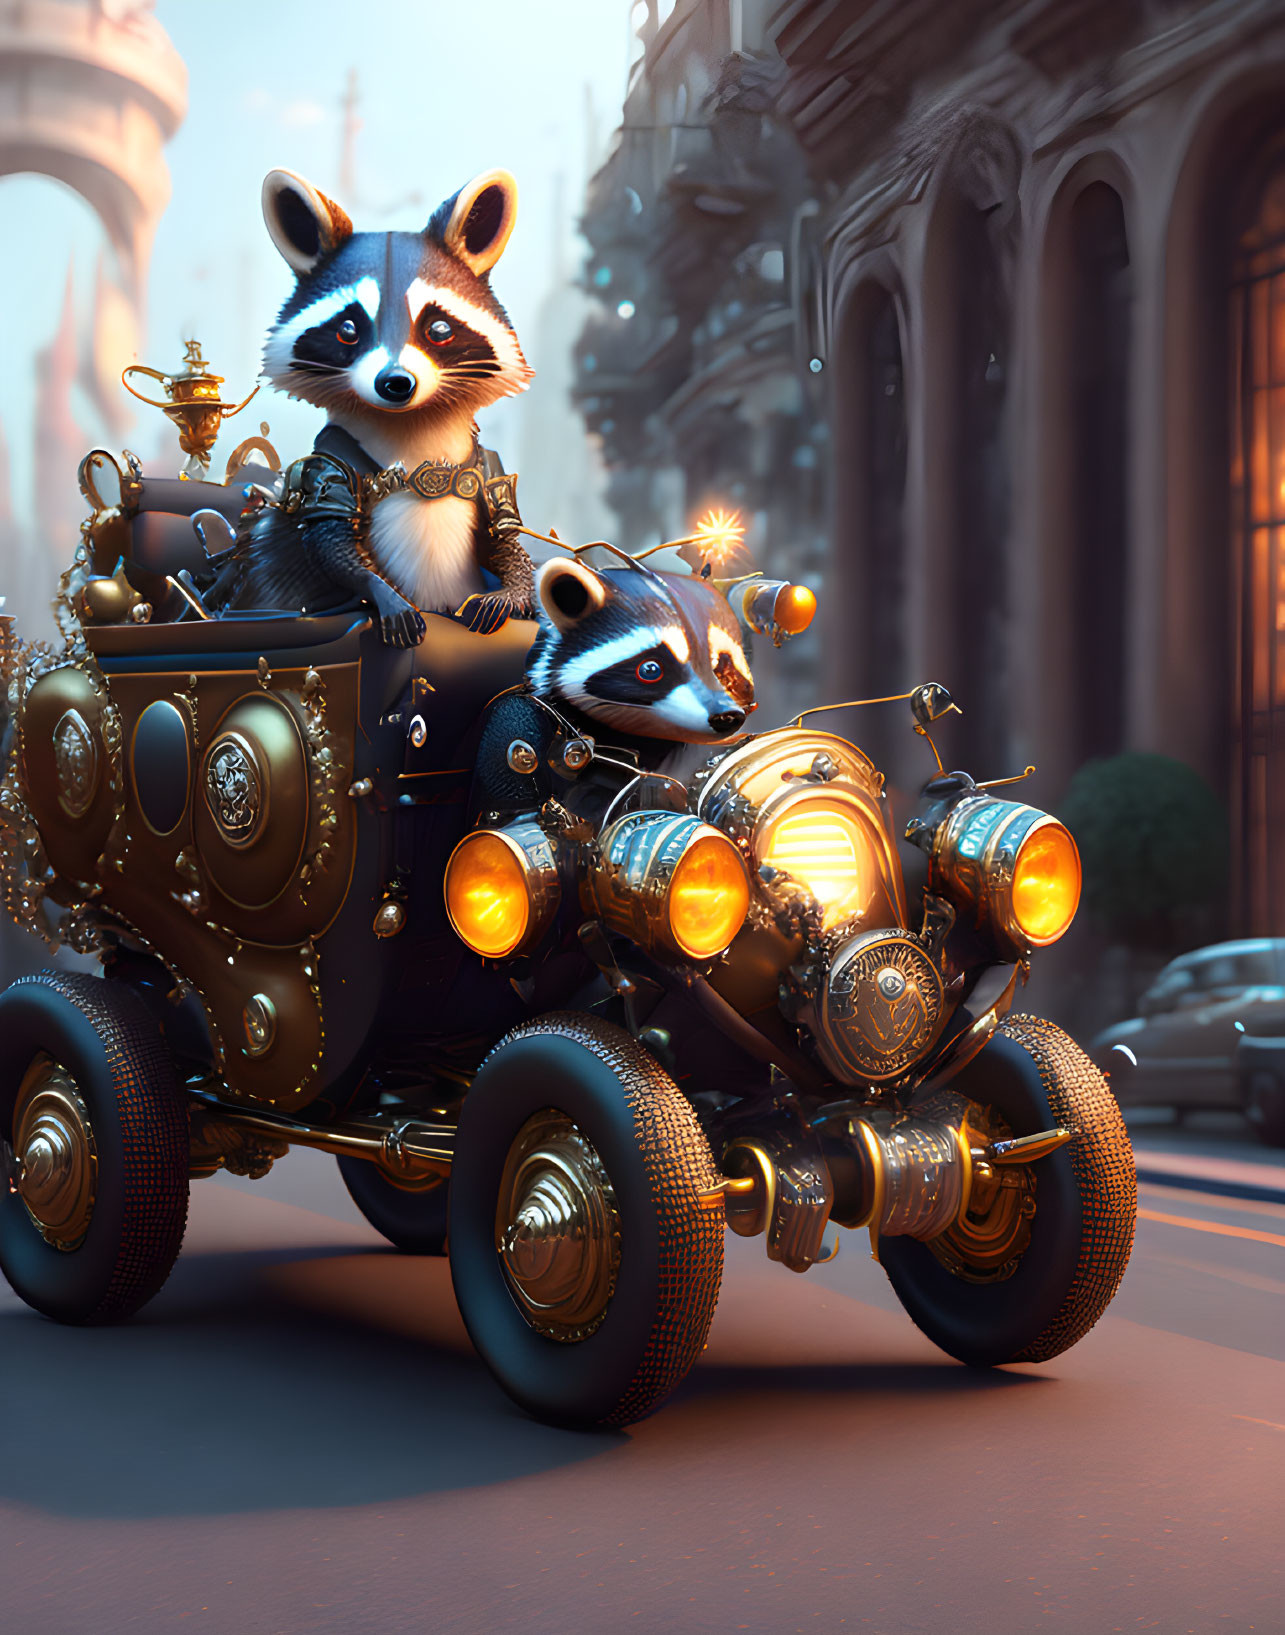 Vintage attired animated raccoons in ornate steampunk vehicle in city dusk scene